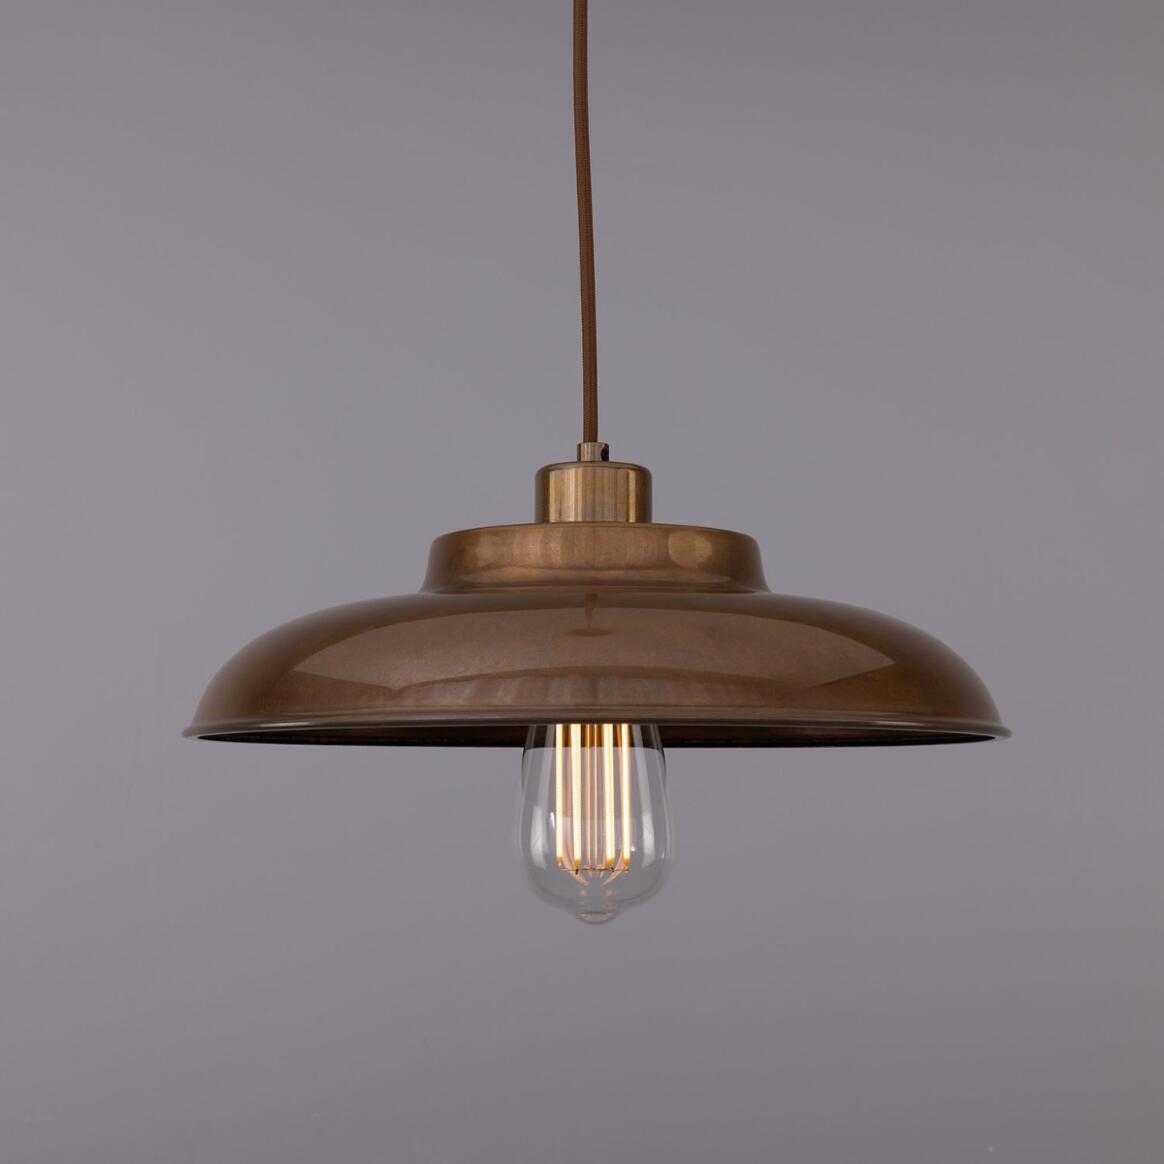 Telal Industrial Factory Pendant Light 12.6" main product image